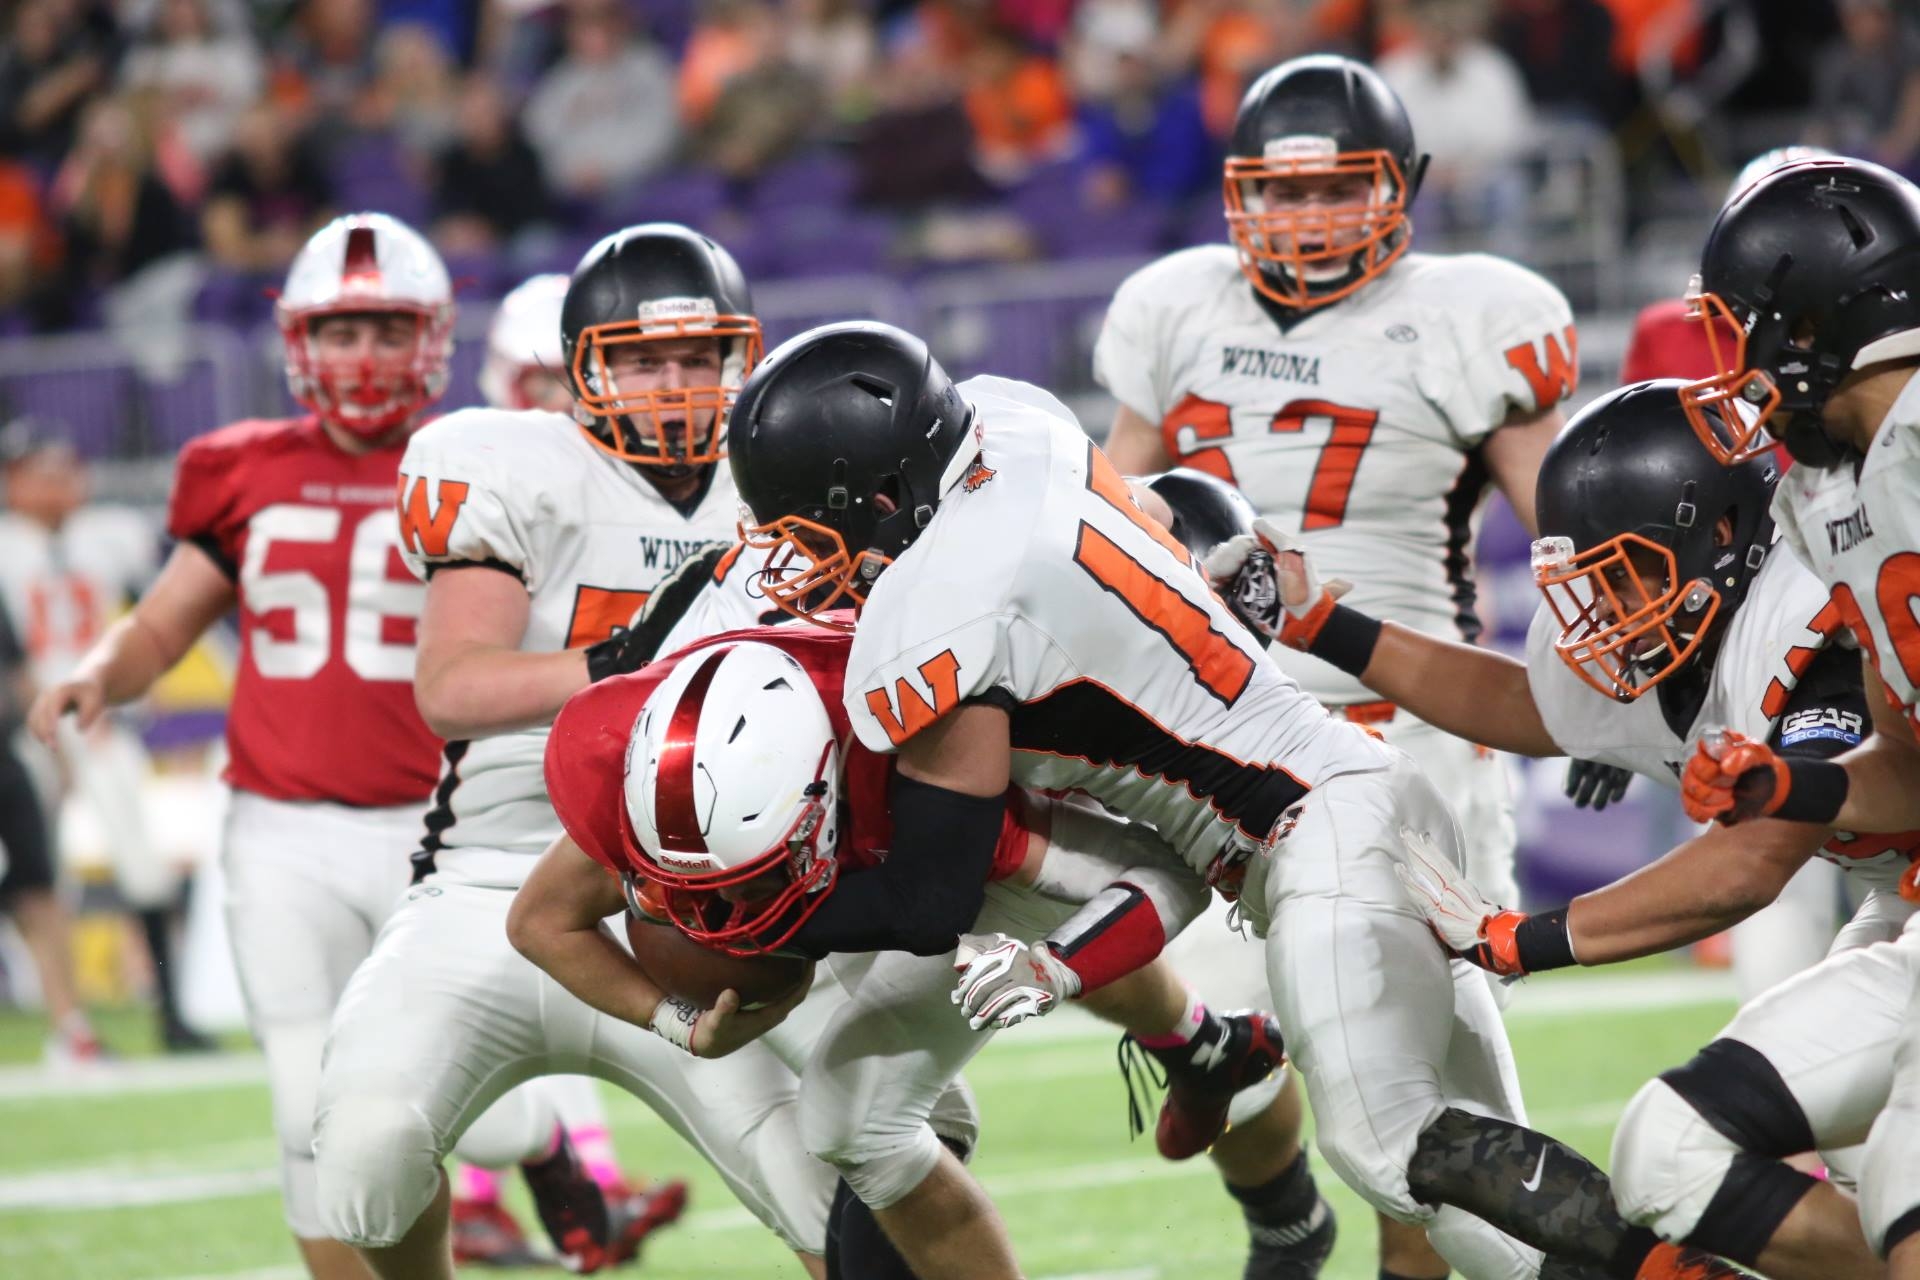 Winona can’t find answer in bid for first state championship